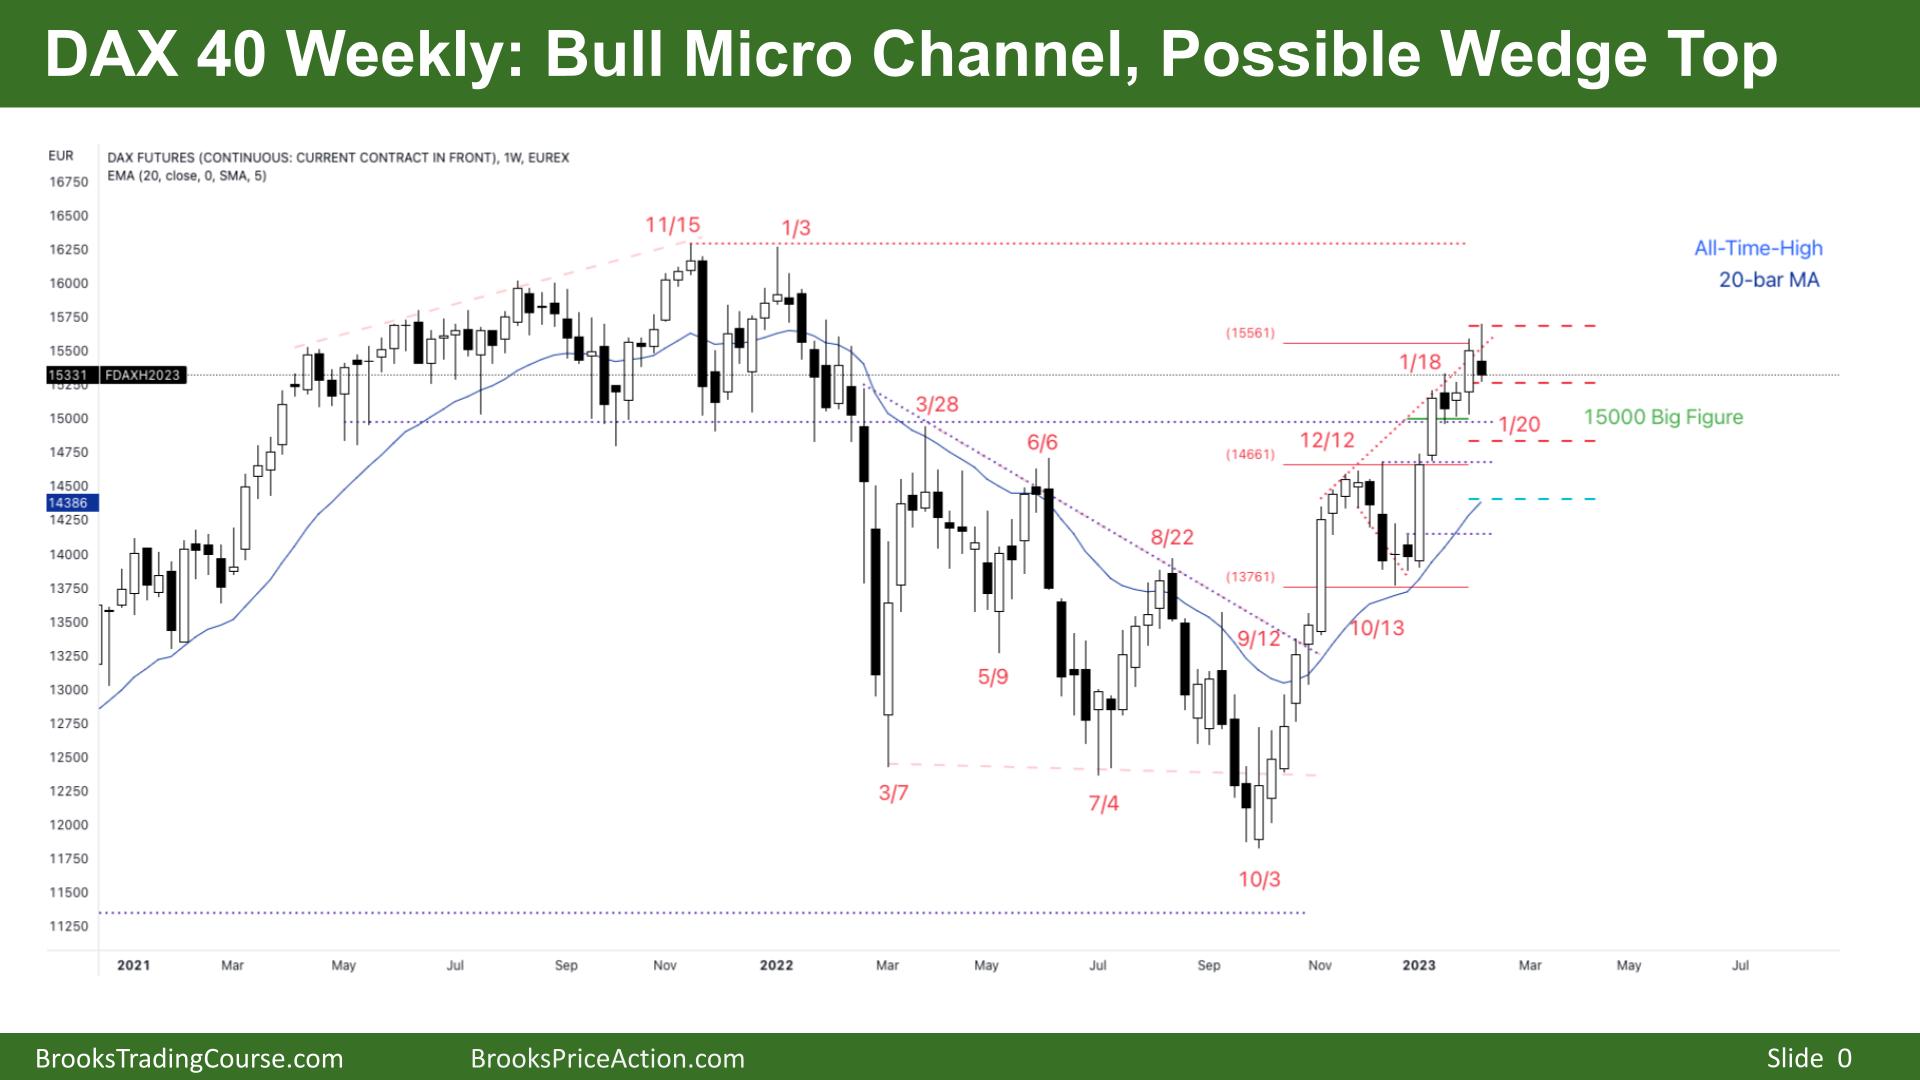 DAX 40 Bull Micro Channel Possible Wedge Top